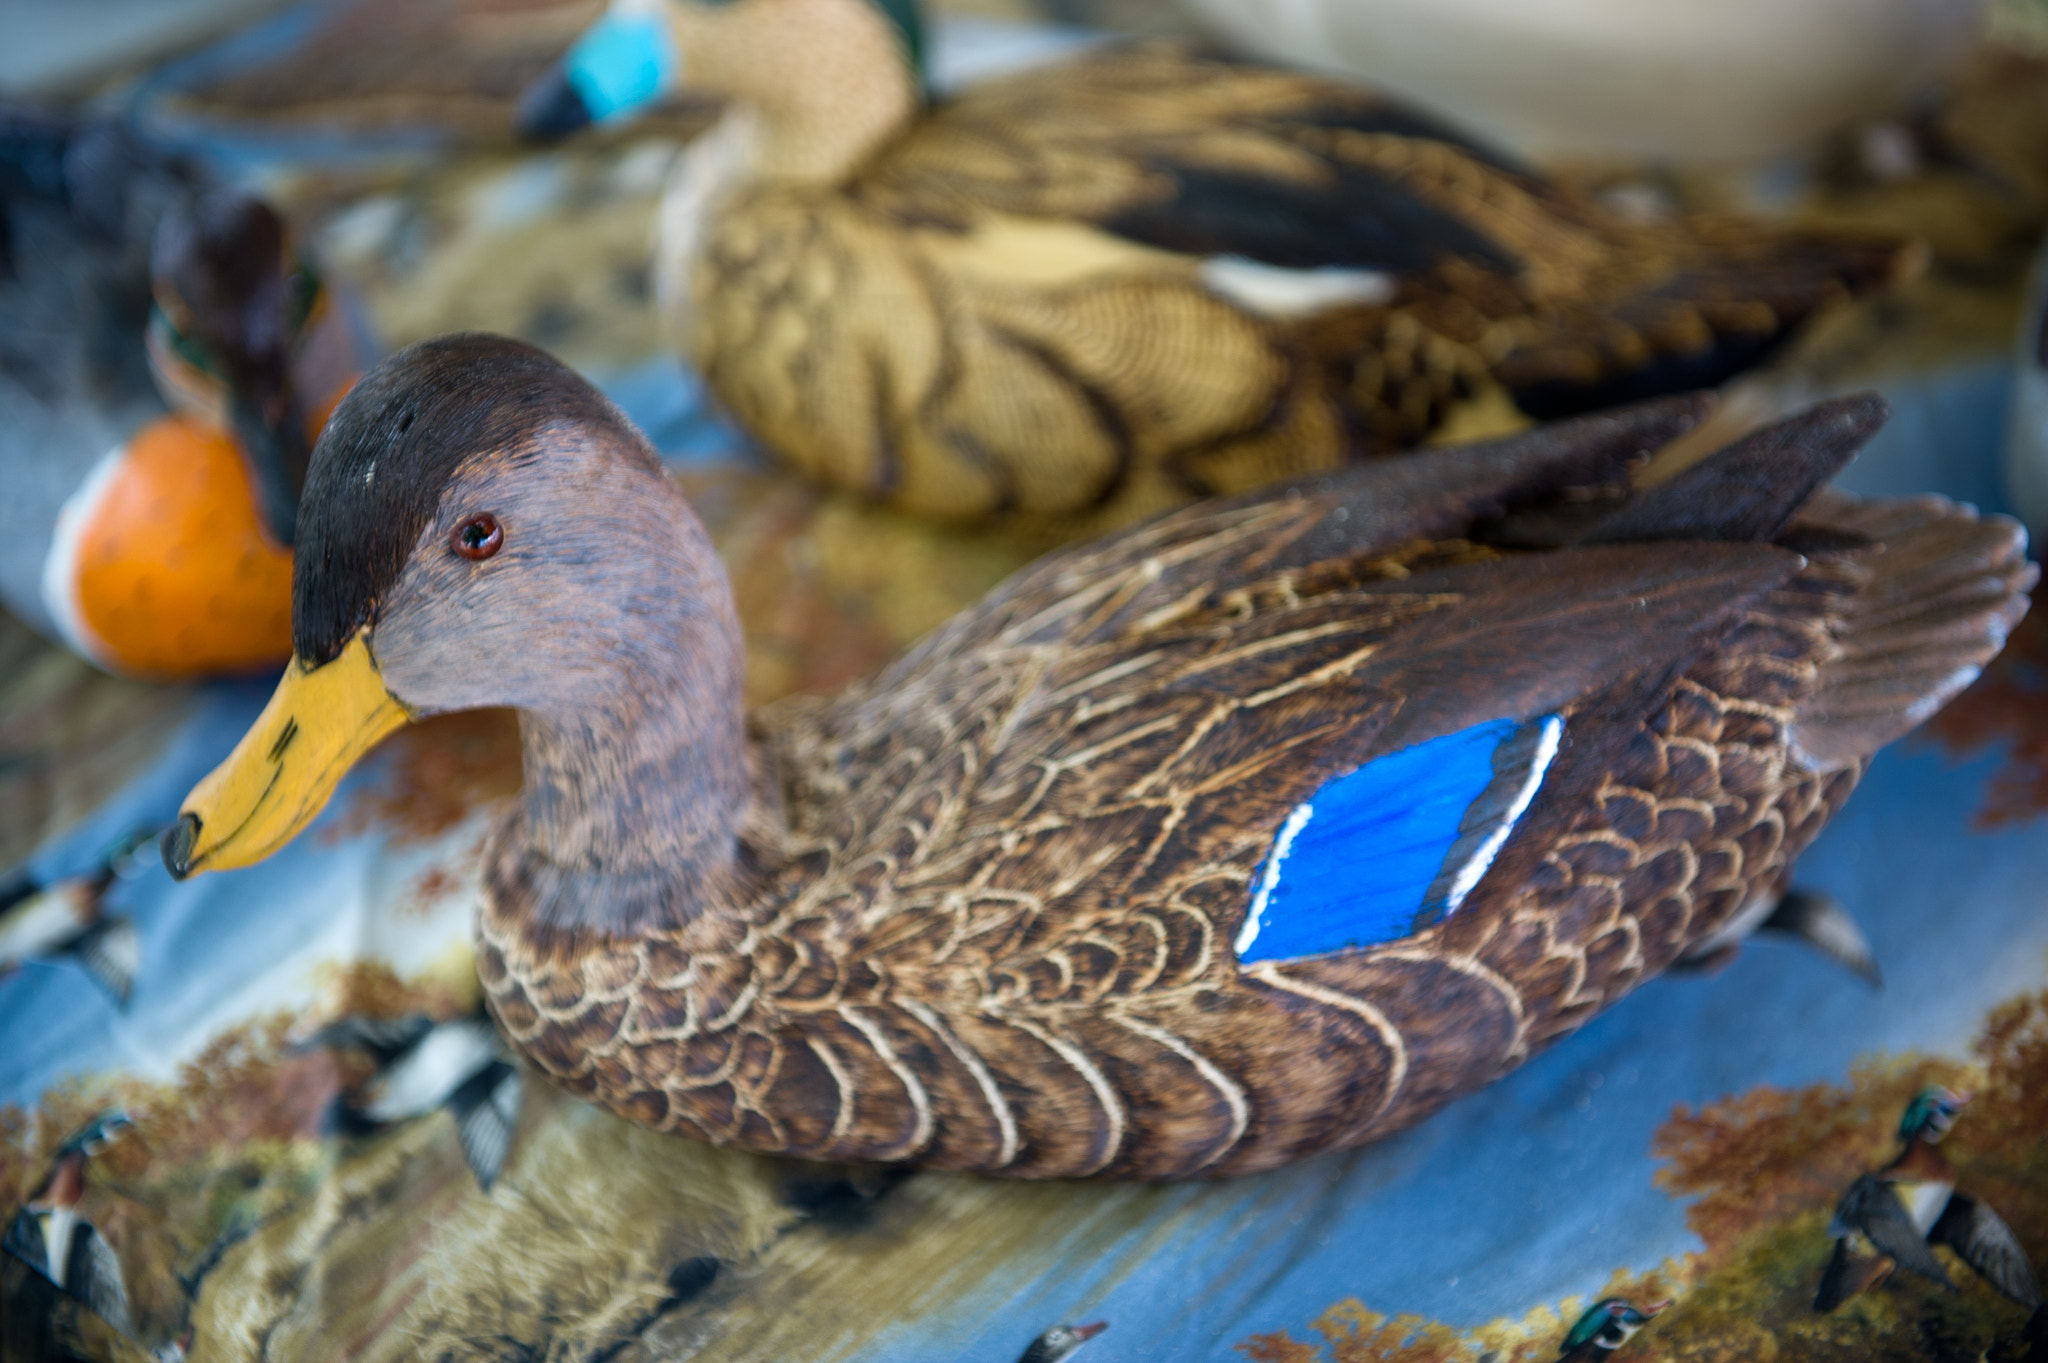 Nikon D3S sample photo. Duck decoy on display at the chesapeake bay maritime museum in st. michaels md photography